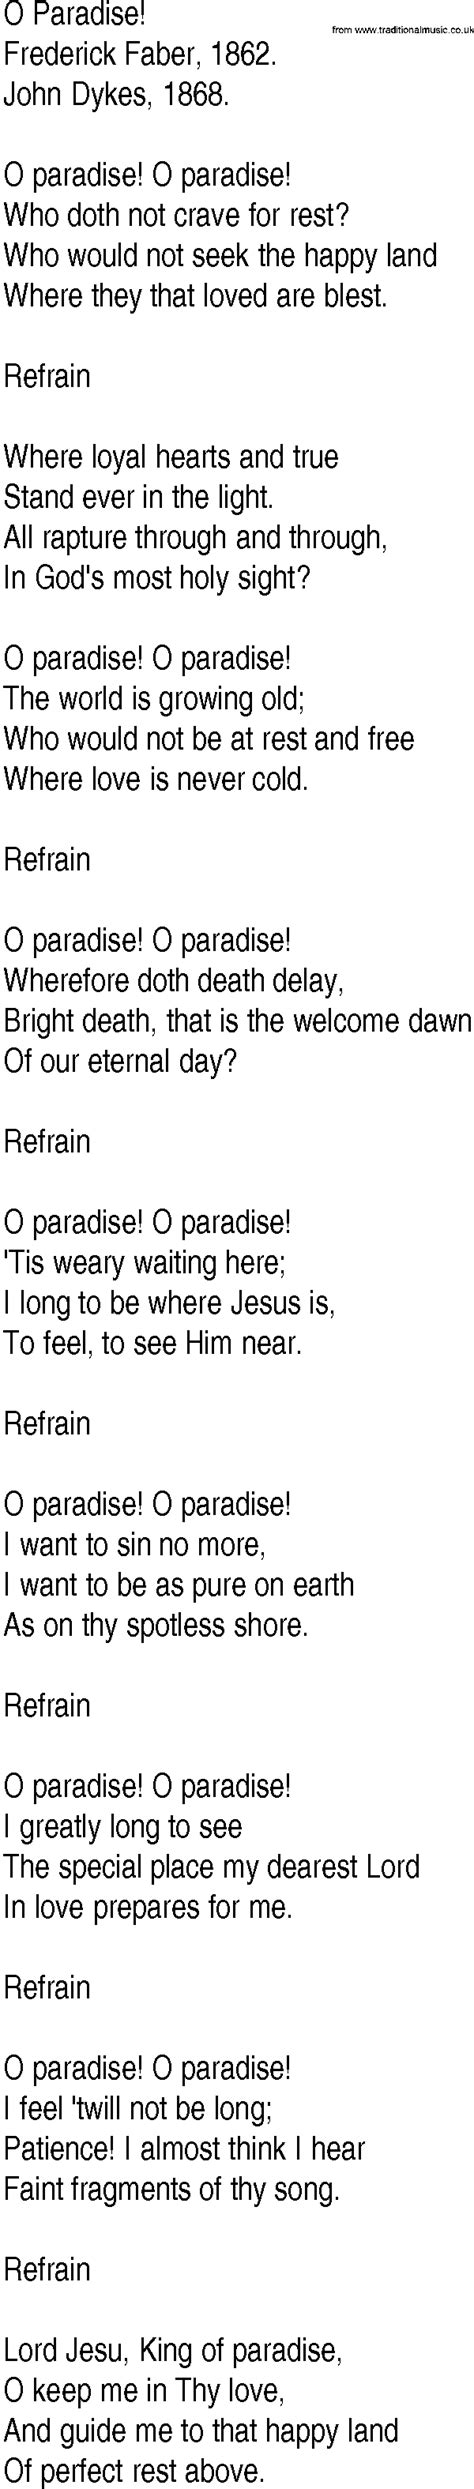 Hymn And Gospel Song Lyrics For O Paradise By Frederick Faber